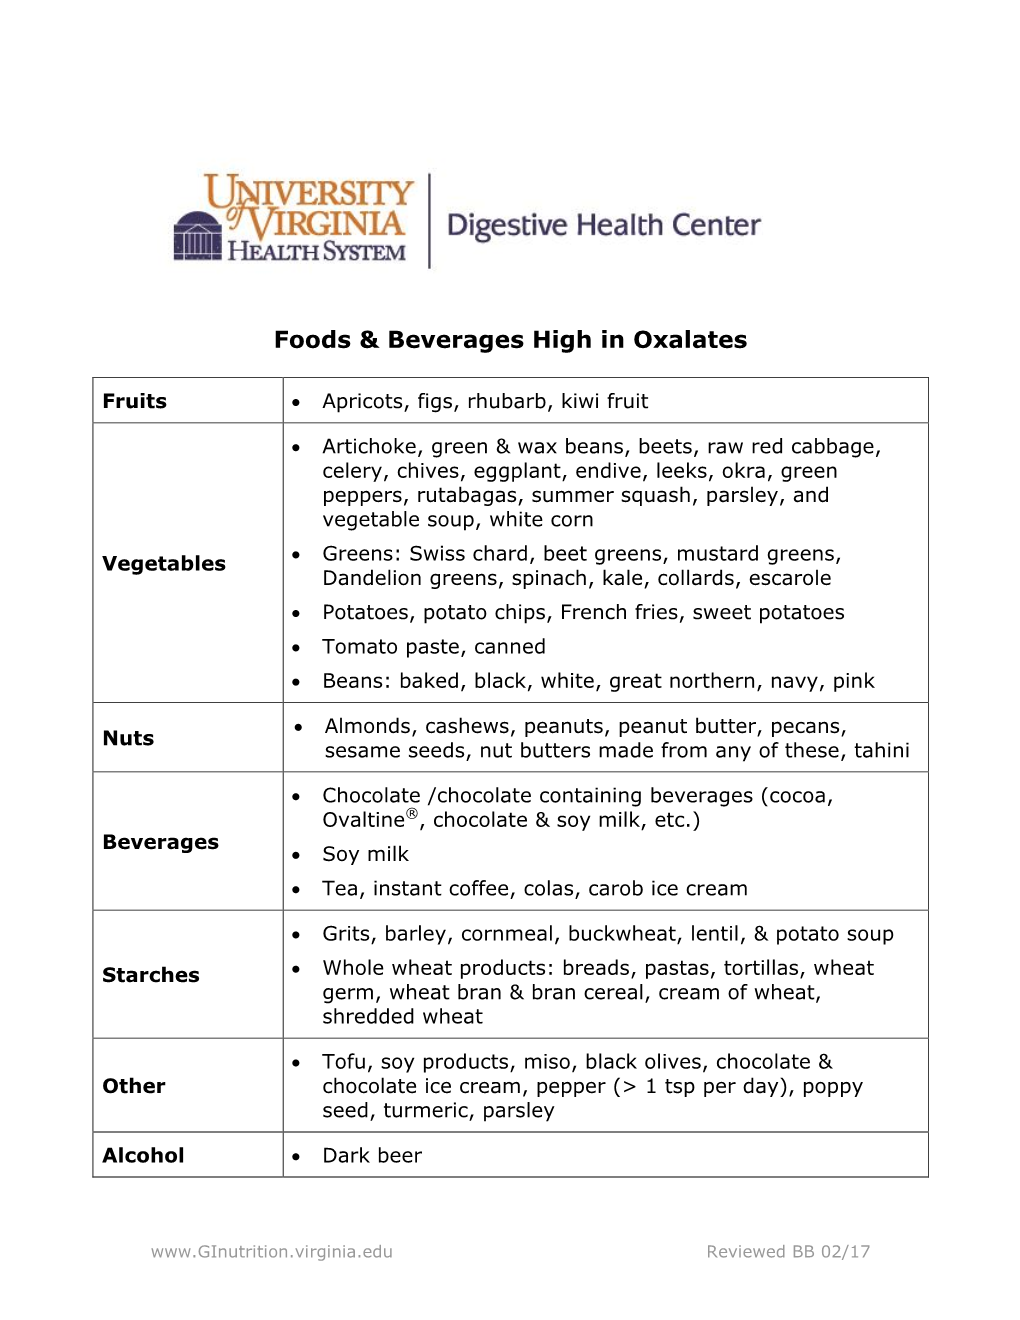 Foods & Beverages High in Oxalates